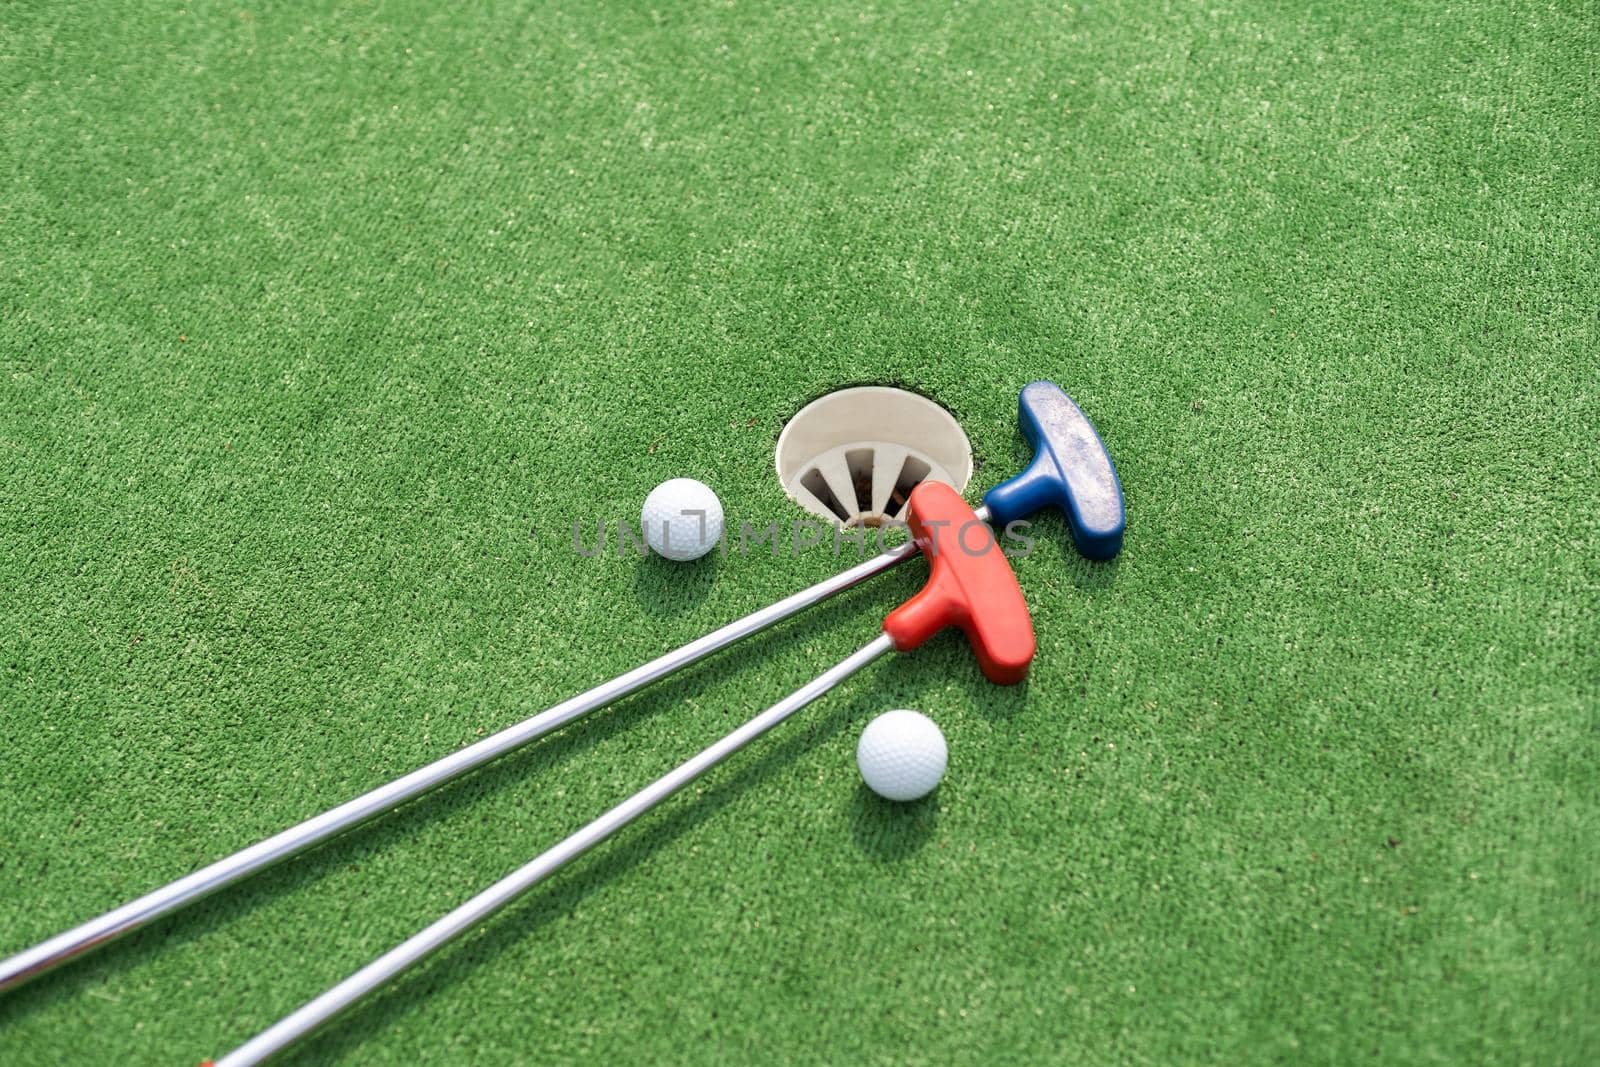 Mini-golf clubs and balls of different colors laid on artificial grass by Andelov13